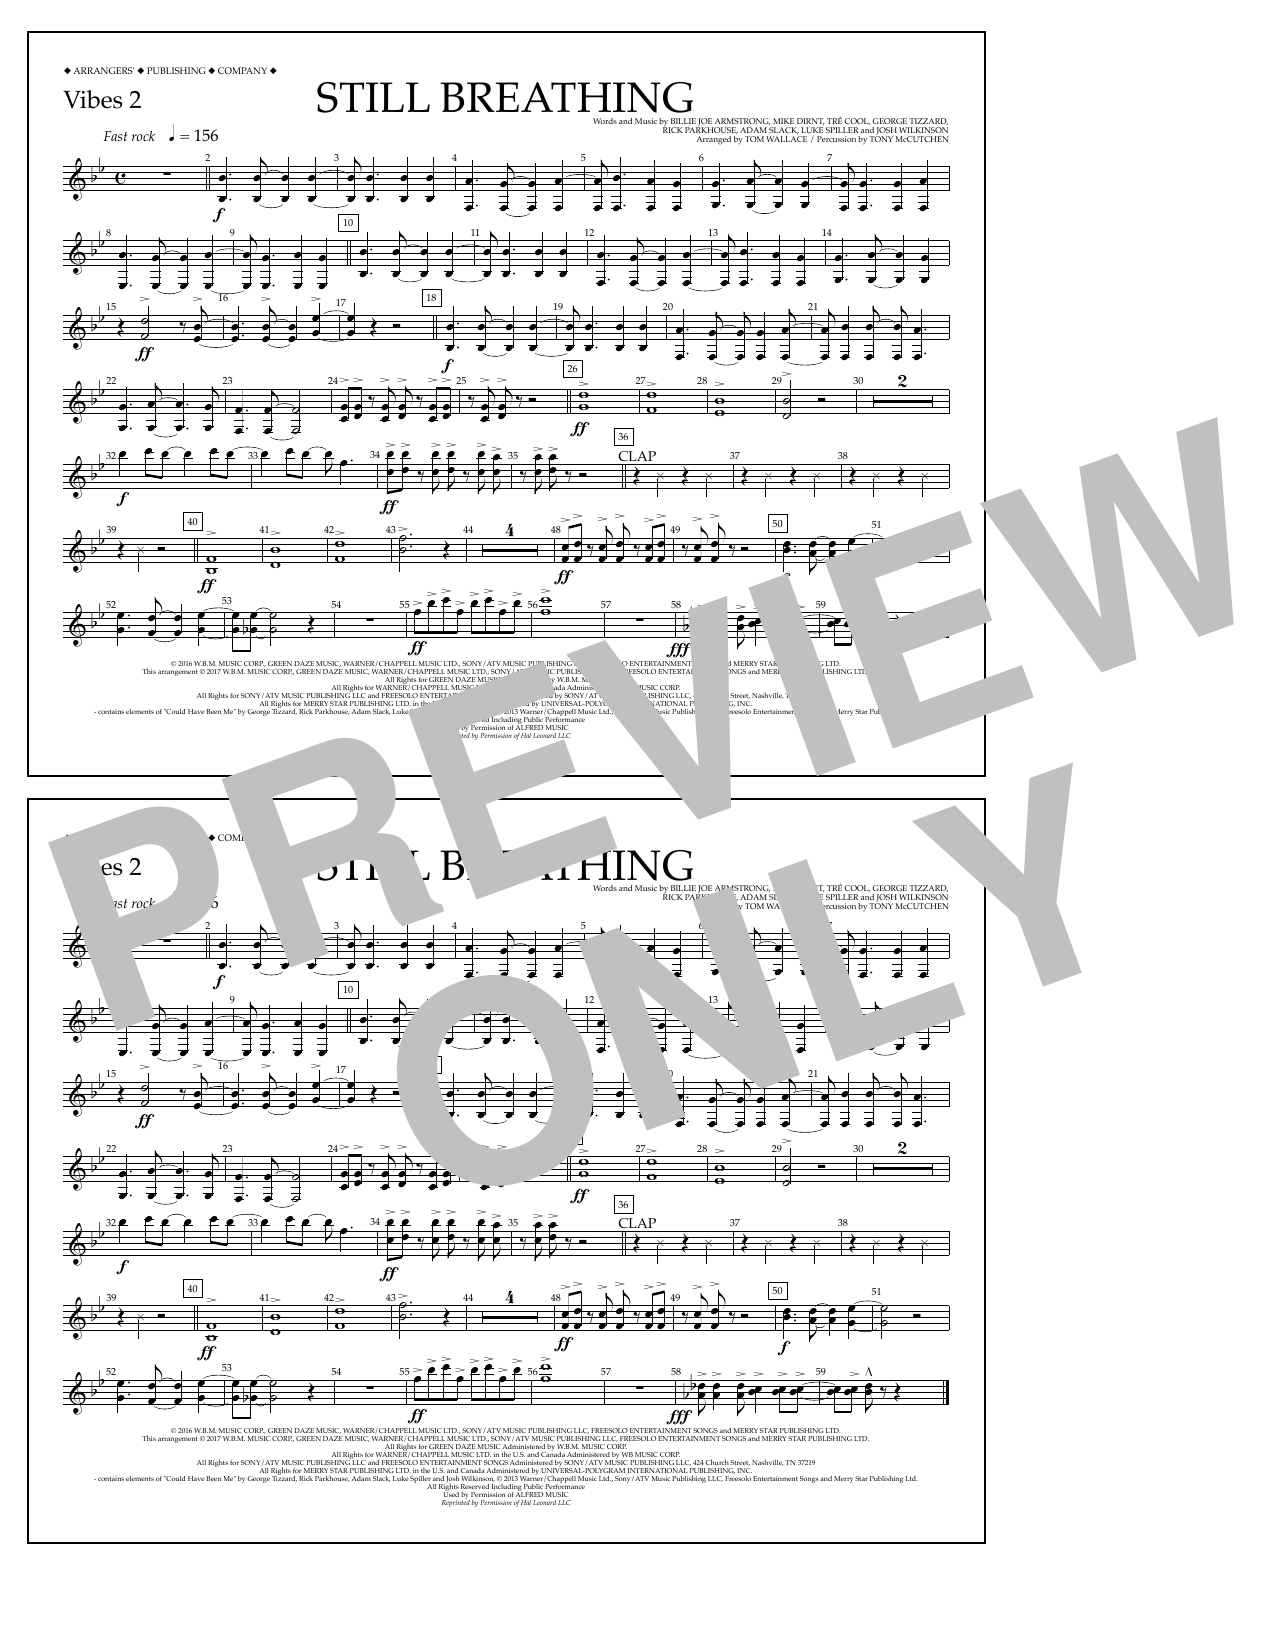 Download Tom Wallace Still Breathing - Vibes 2 Sheet Music